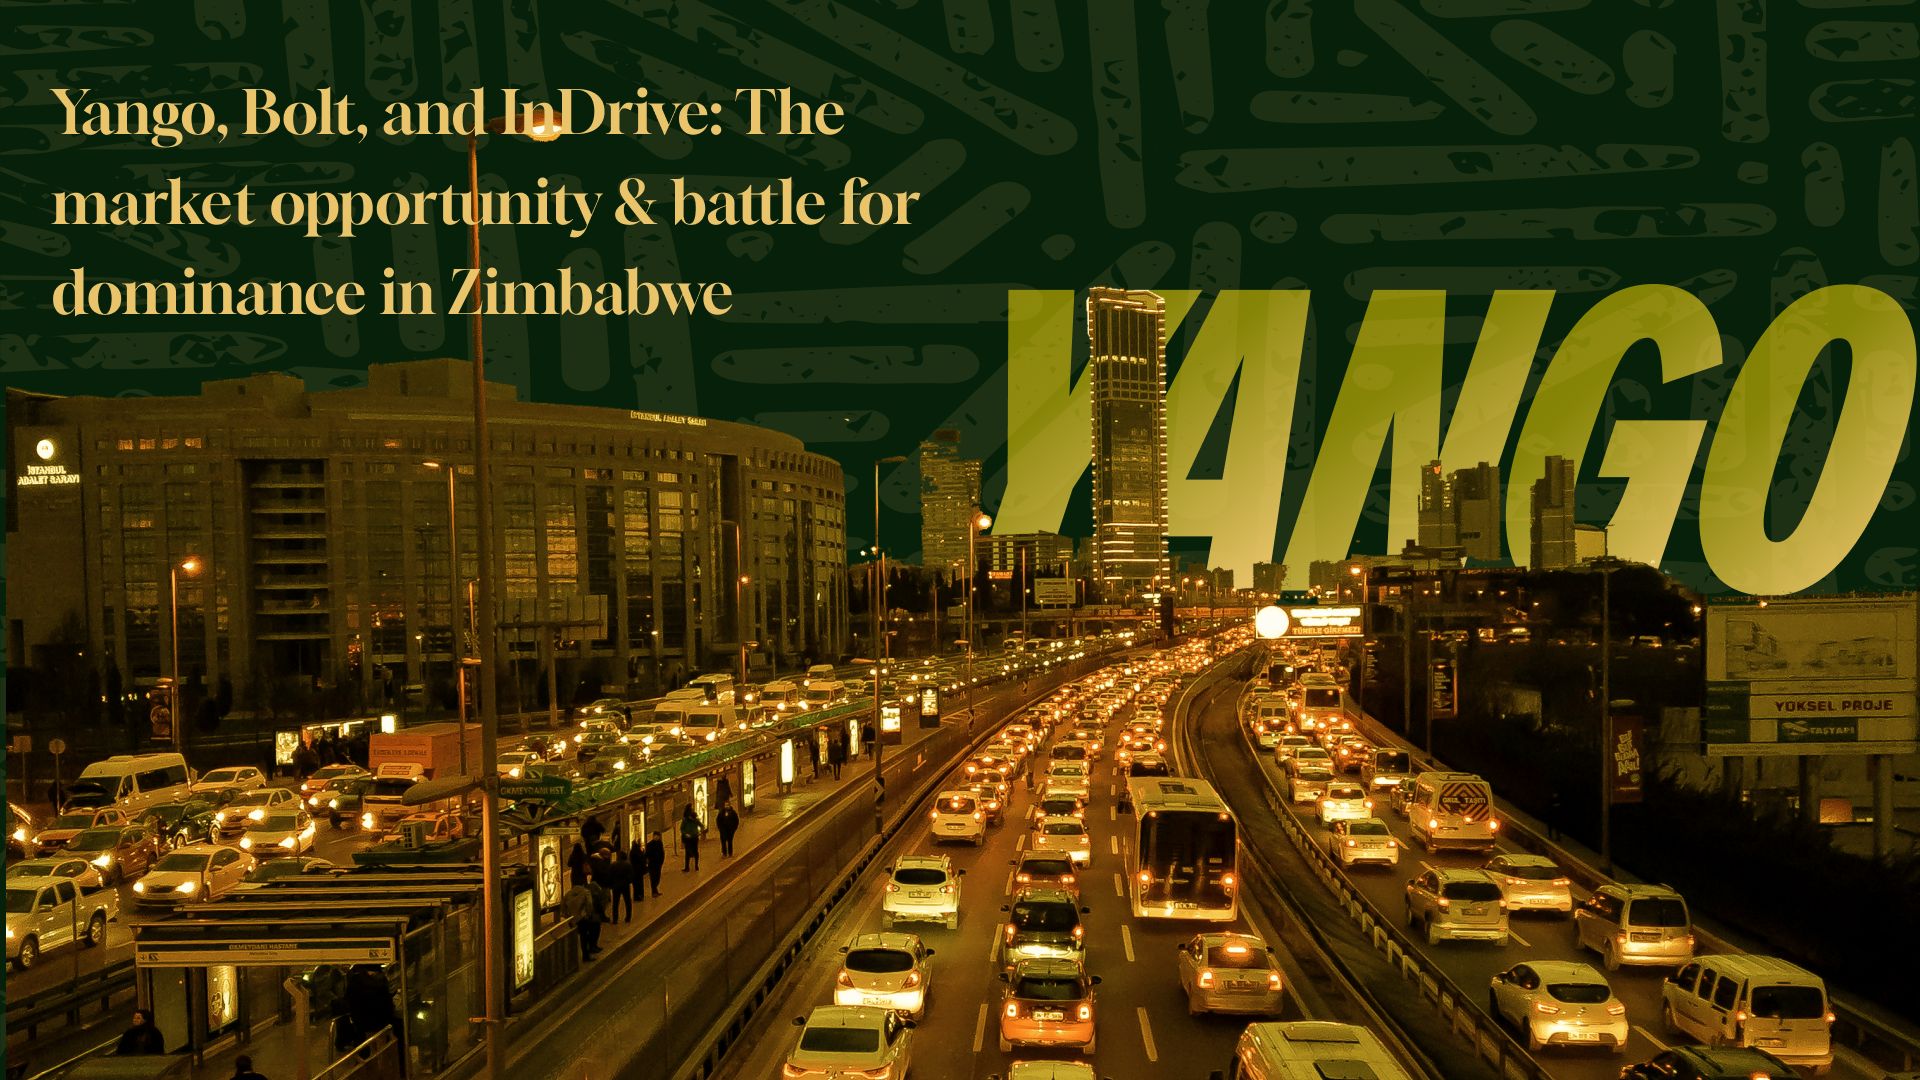 Yango, Bolt, and InDrive: The market opportunity & battle for dominance in Zimbabwe